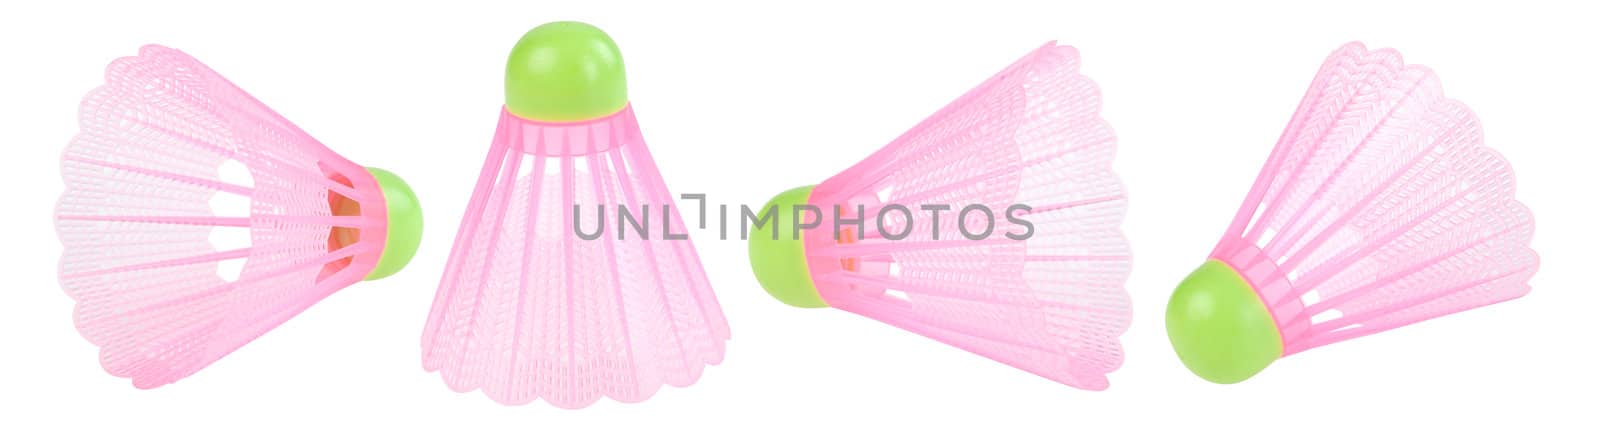 Four badminton shuttlecoc isolated. Clipping path